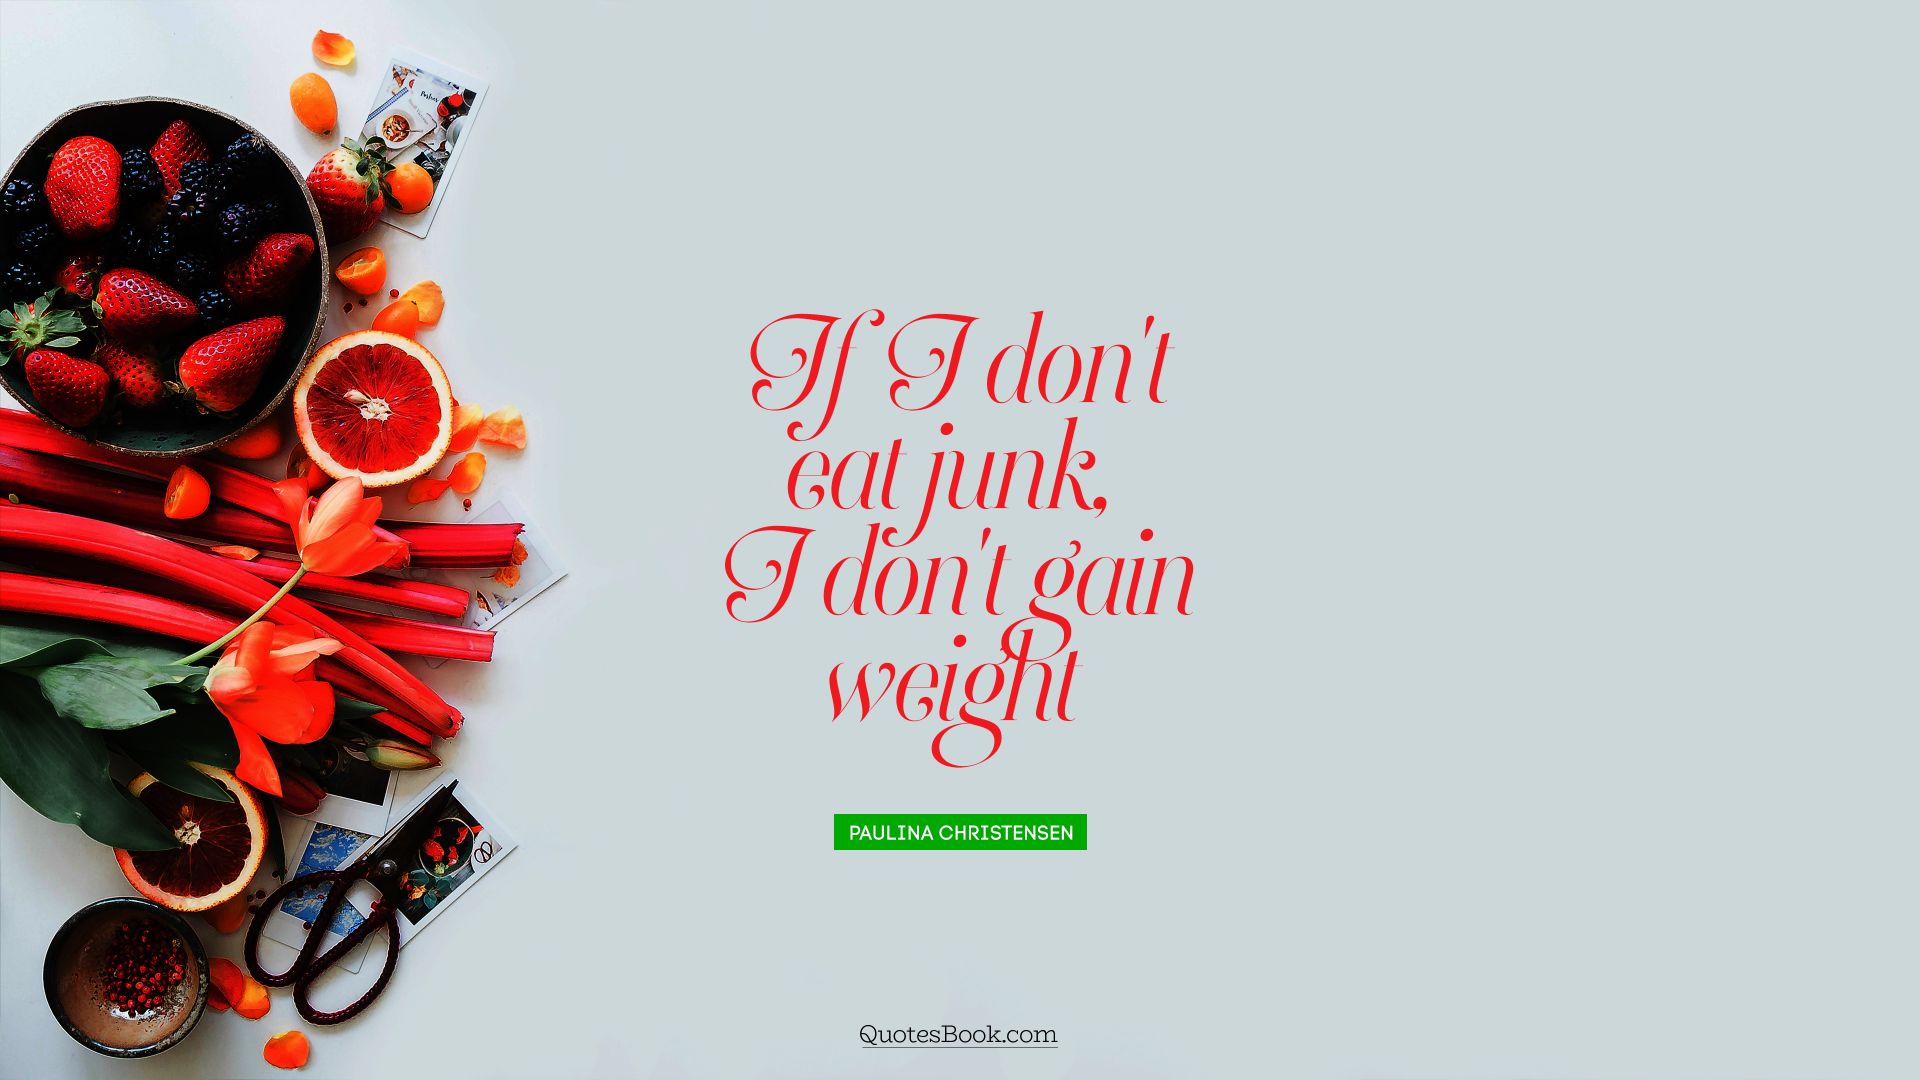 If I don't eat junk, I don't gain weight. - Quote by Paulina Christensen